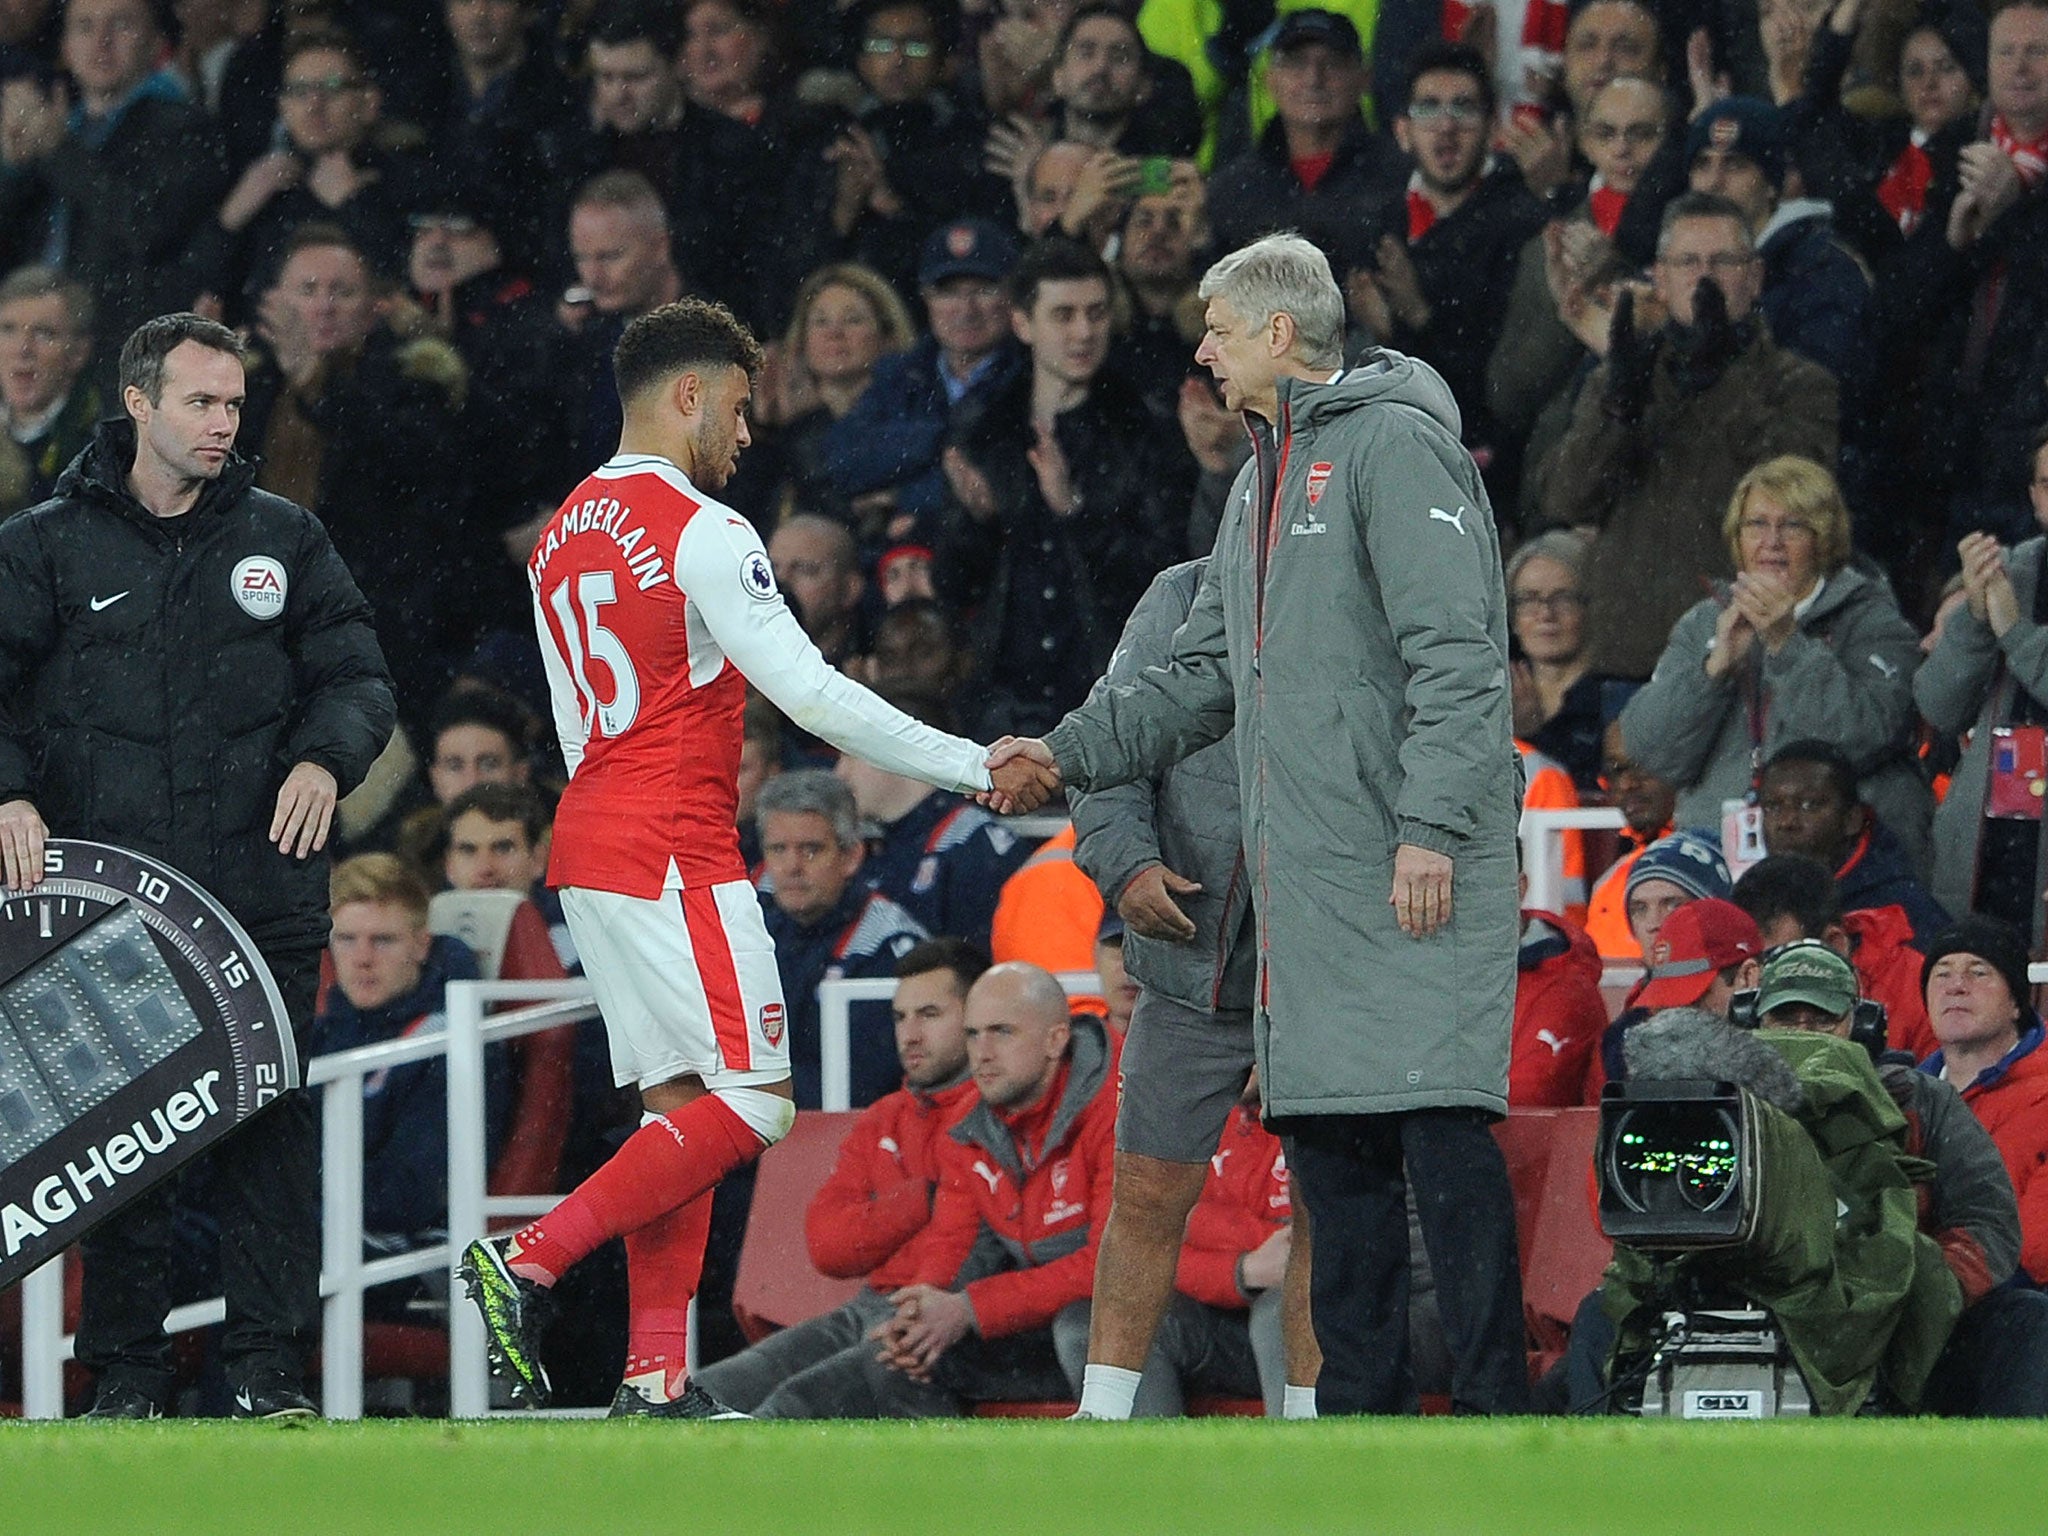 Alex Oxlade-Chamberlain and Arsene Wenger together during Arsenal's game against Stoke